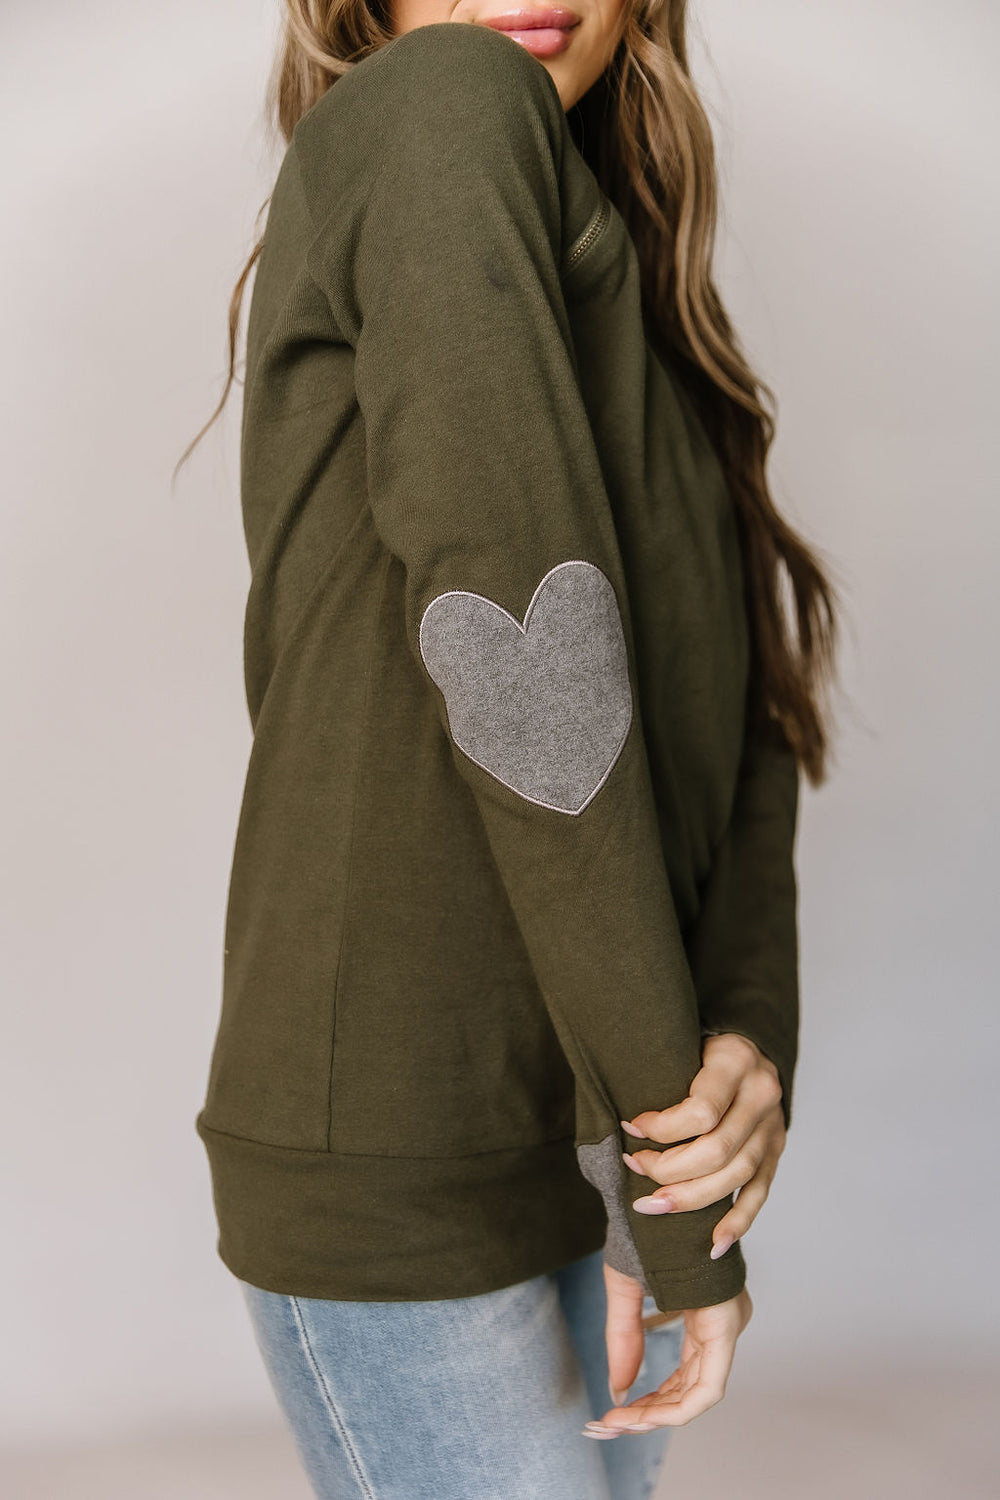 SideZip Pullover - Follow Your Heart - Mindy Mae's Marketcomfy cute hoodies